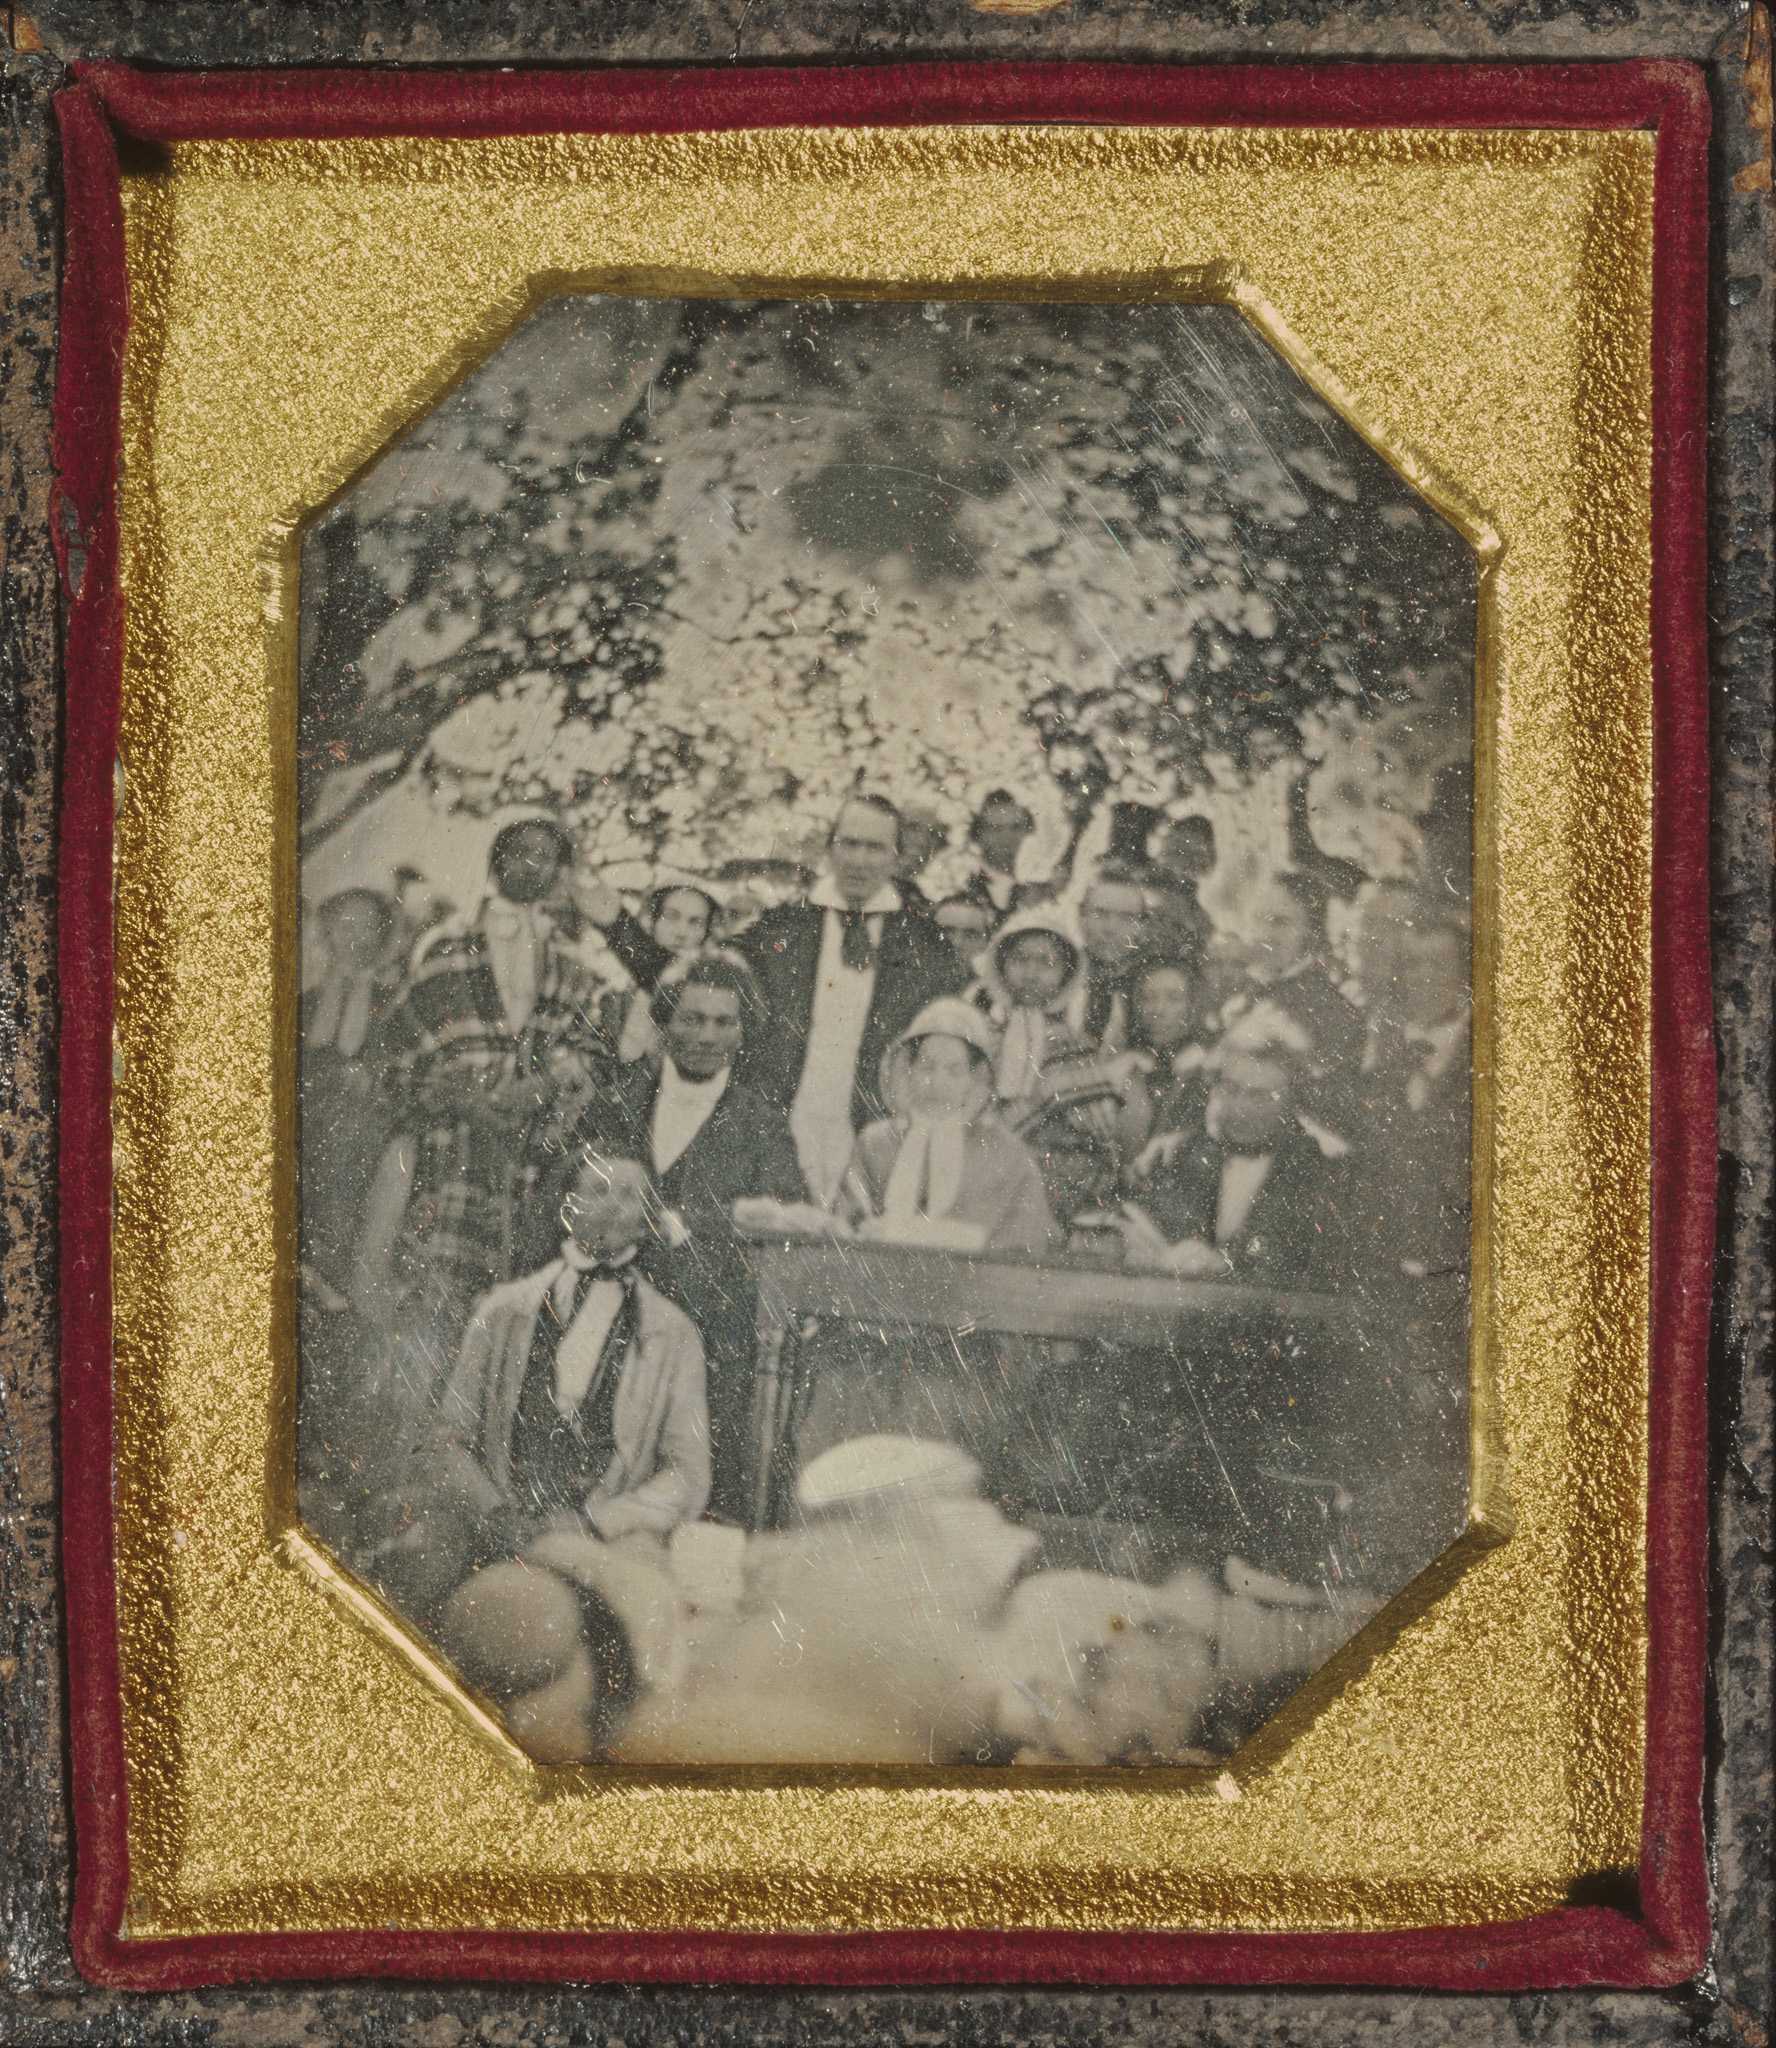 Photograph of Cazenovia Convention in gold and brown frame